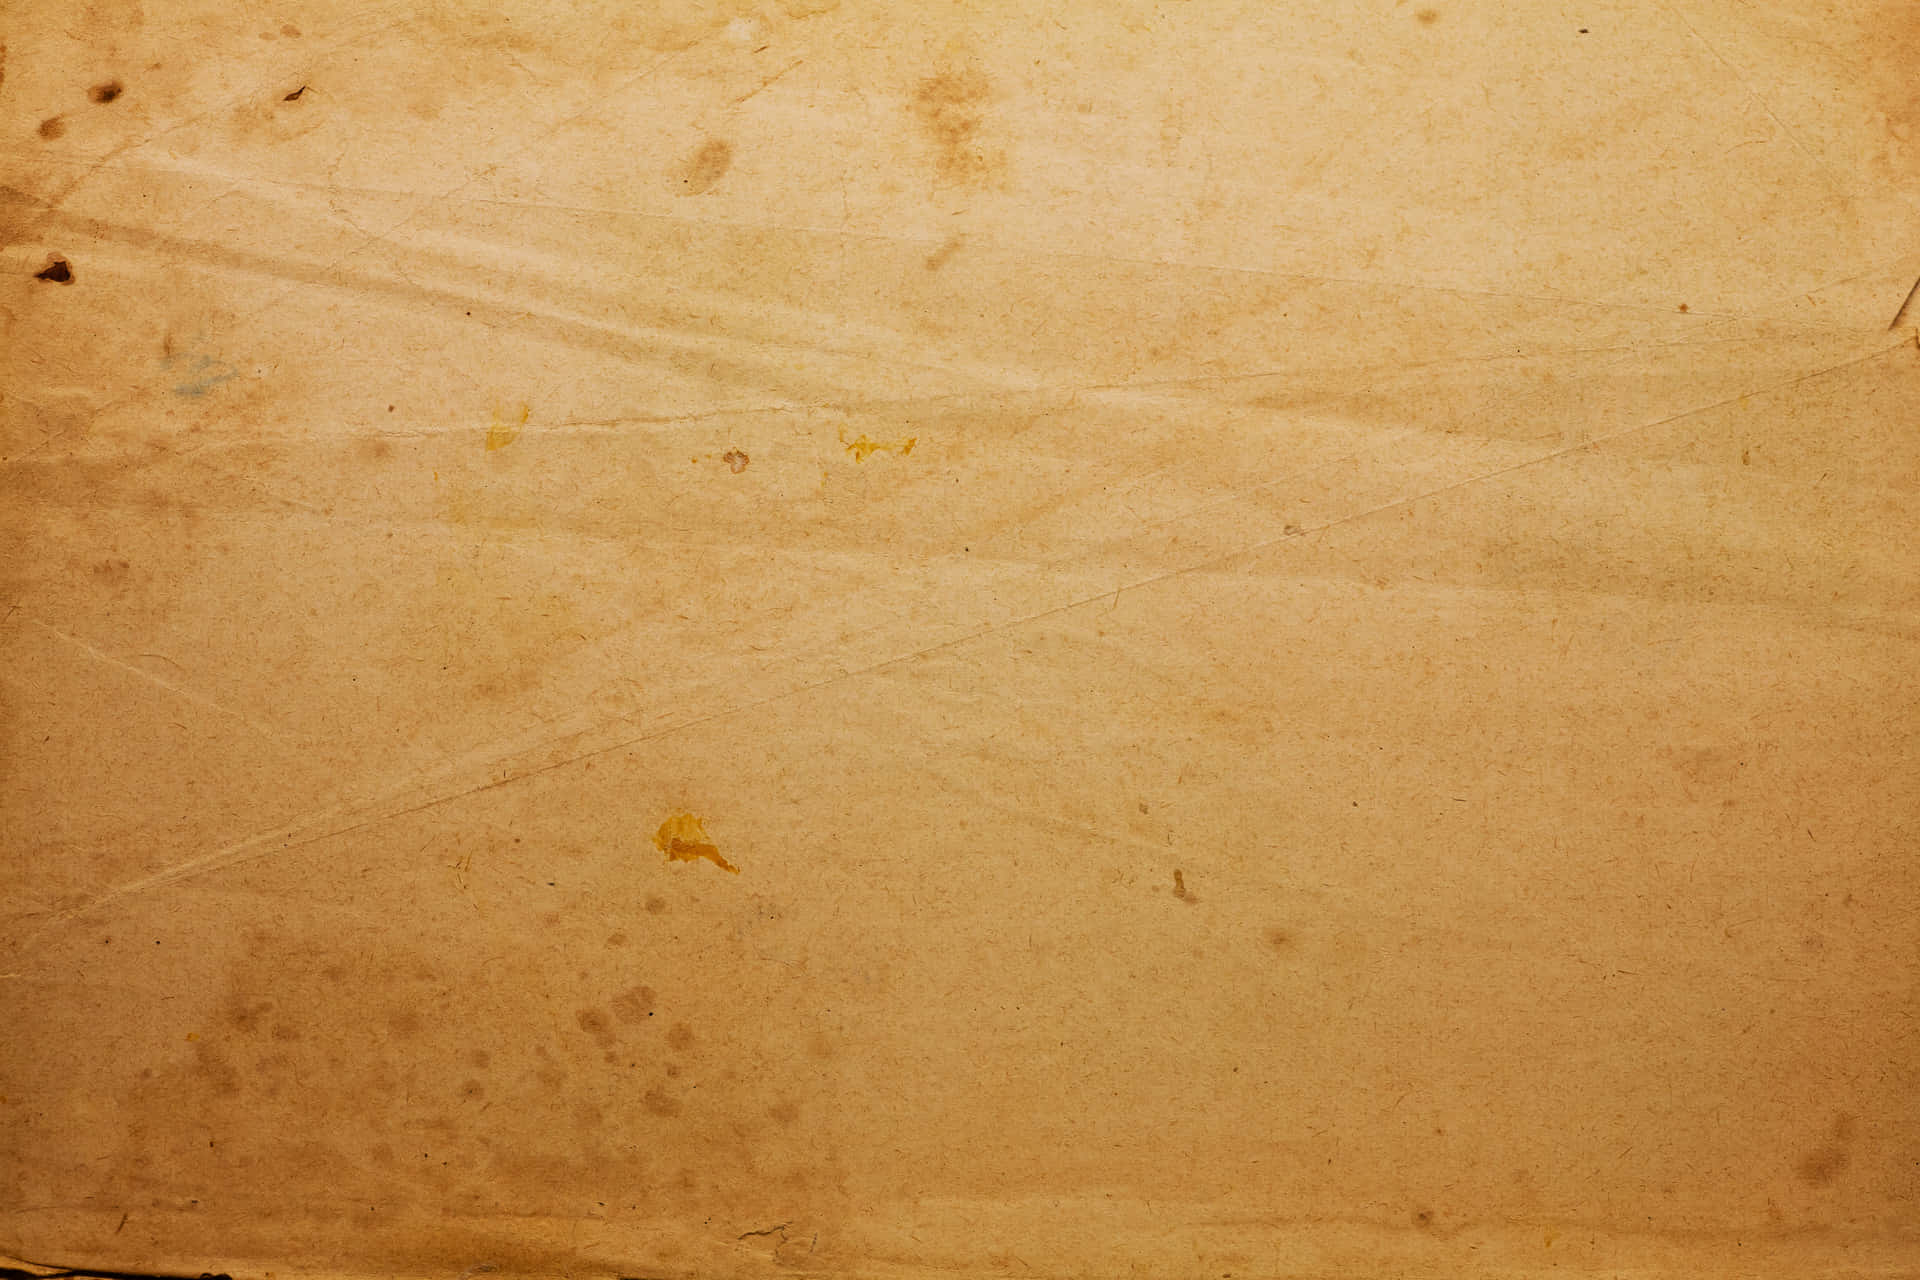 a brown paper with a picture of a cat on it